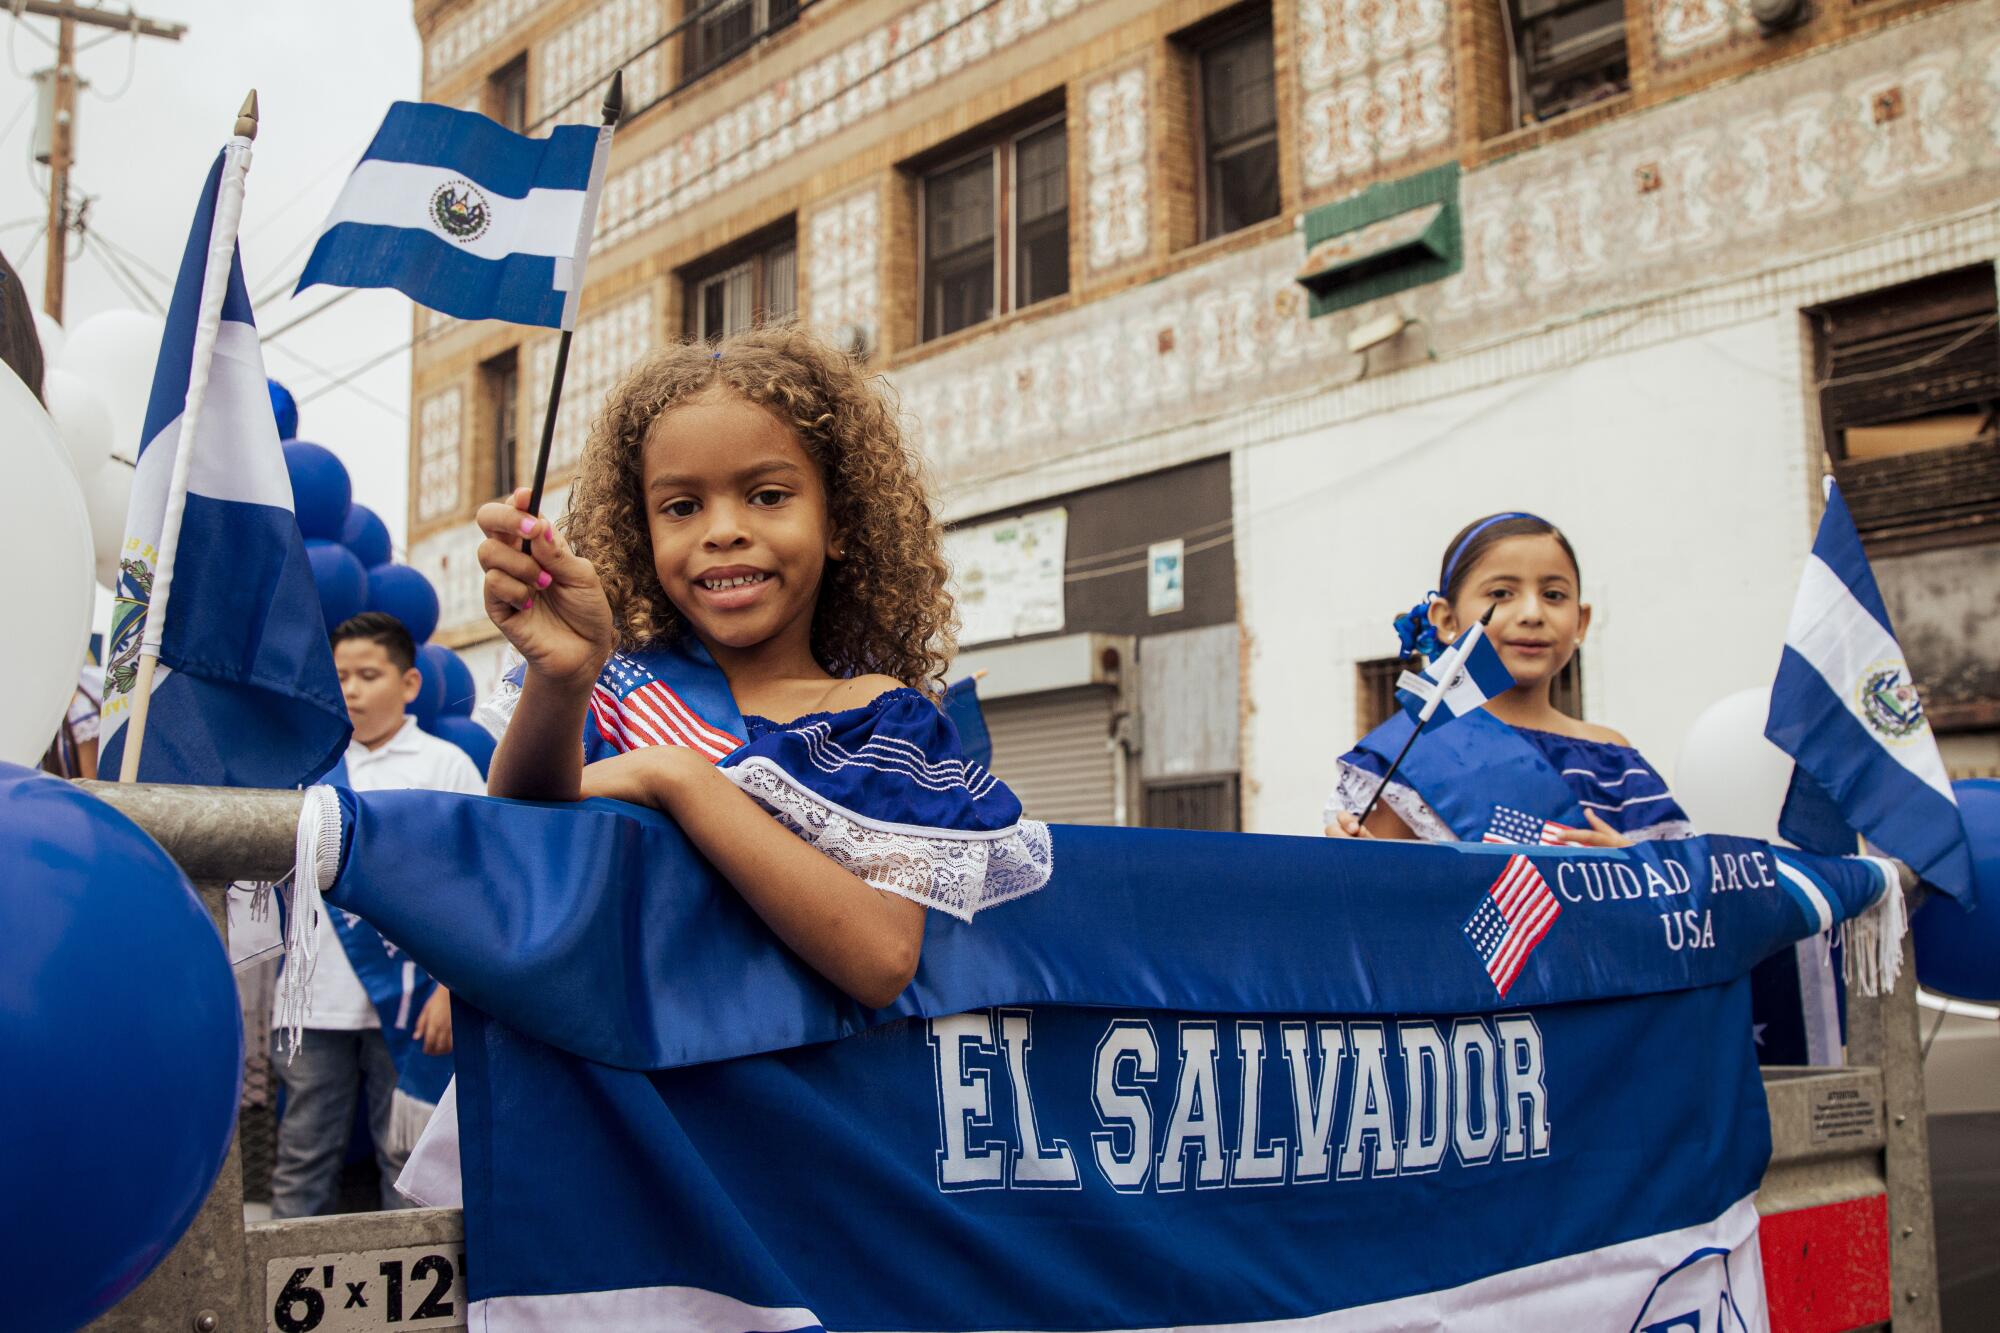 Two young girls stand on top of a float waving their flags at the Central American Independence Day Parade in L.A.